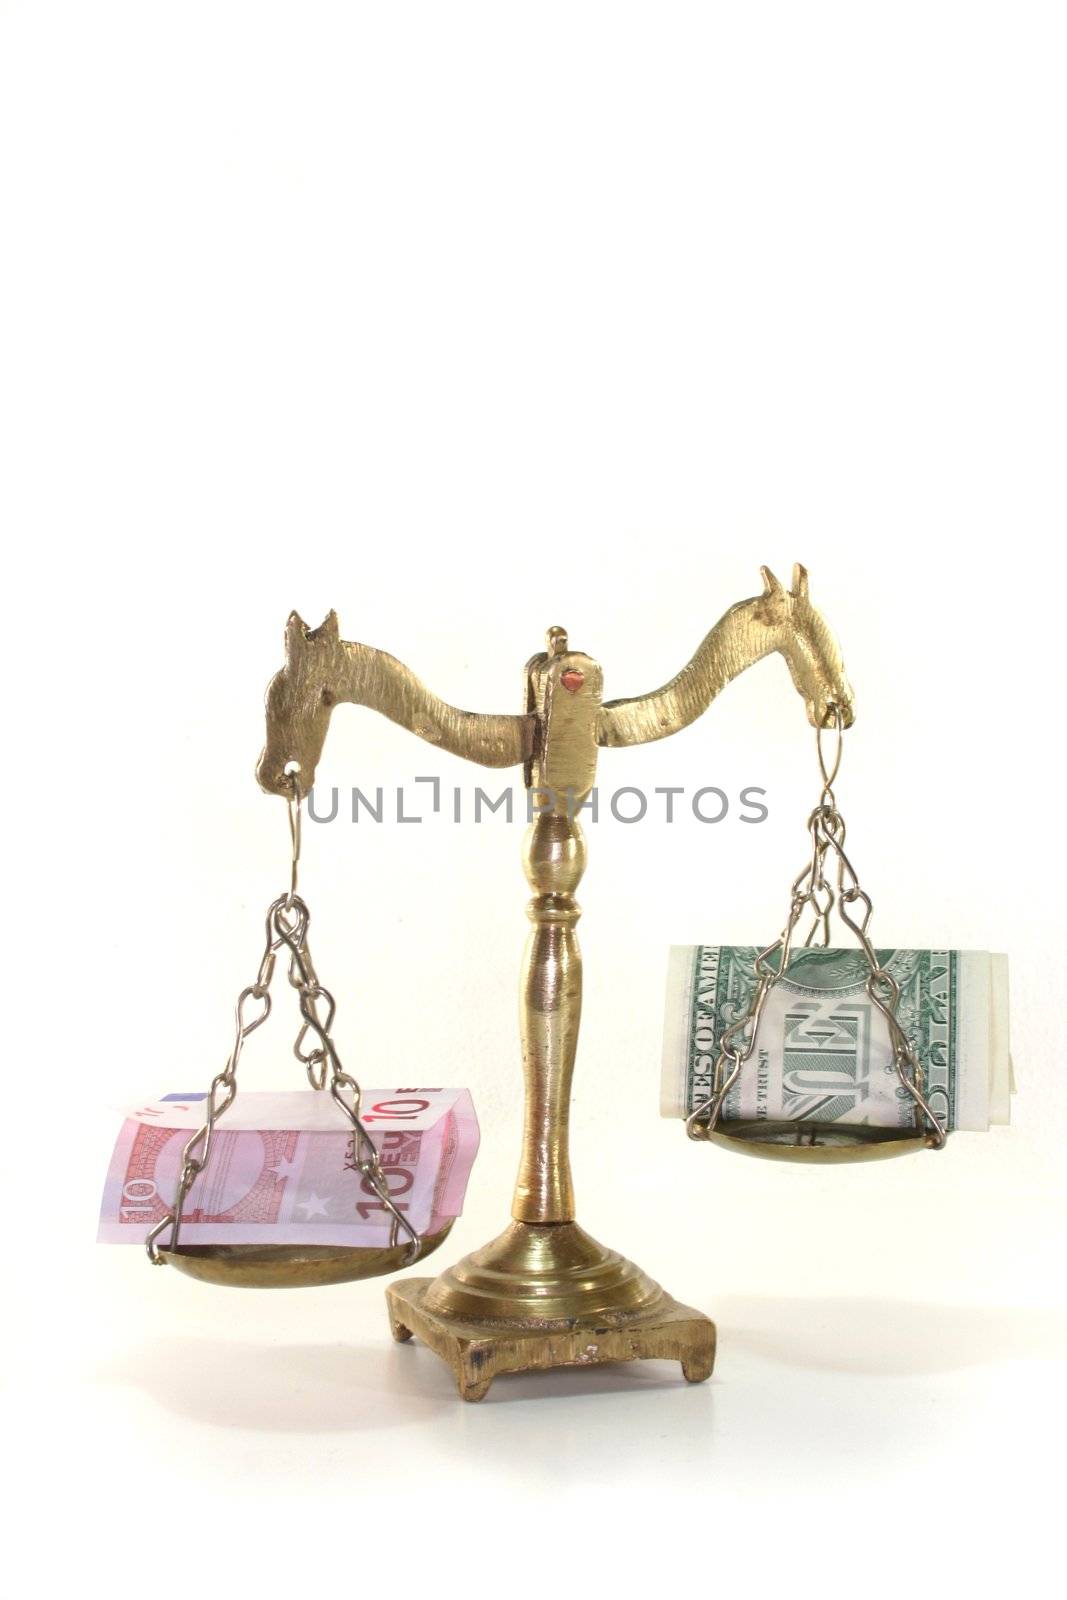 Scale made of brass with dollar bills and Euro banknotes